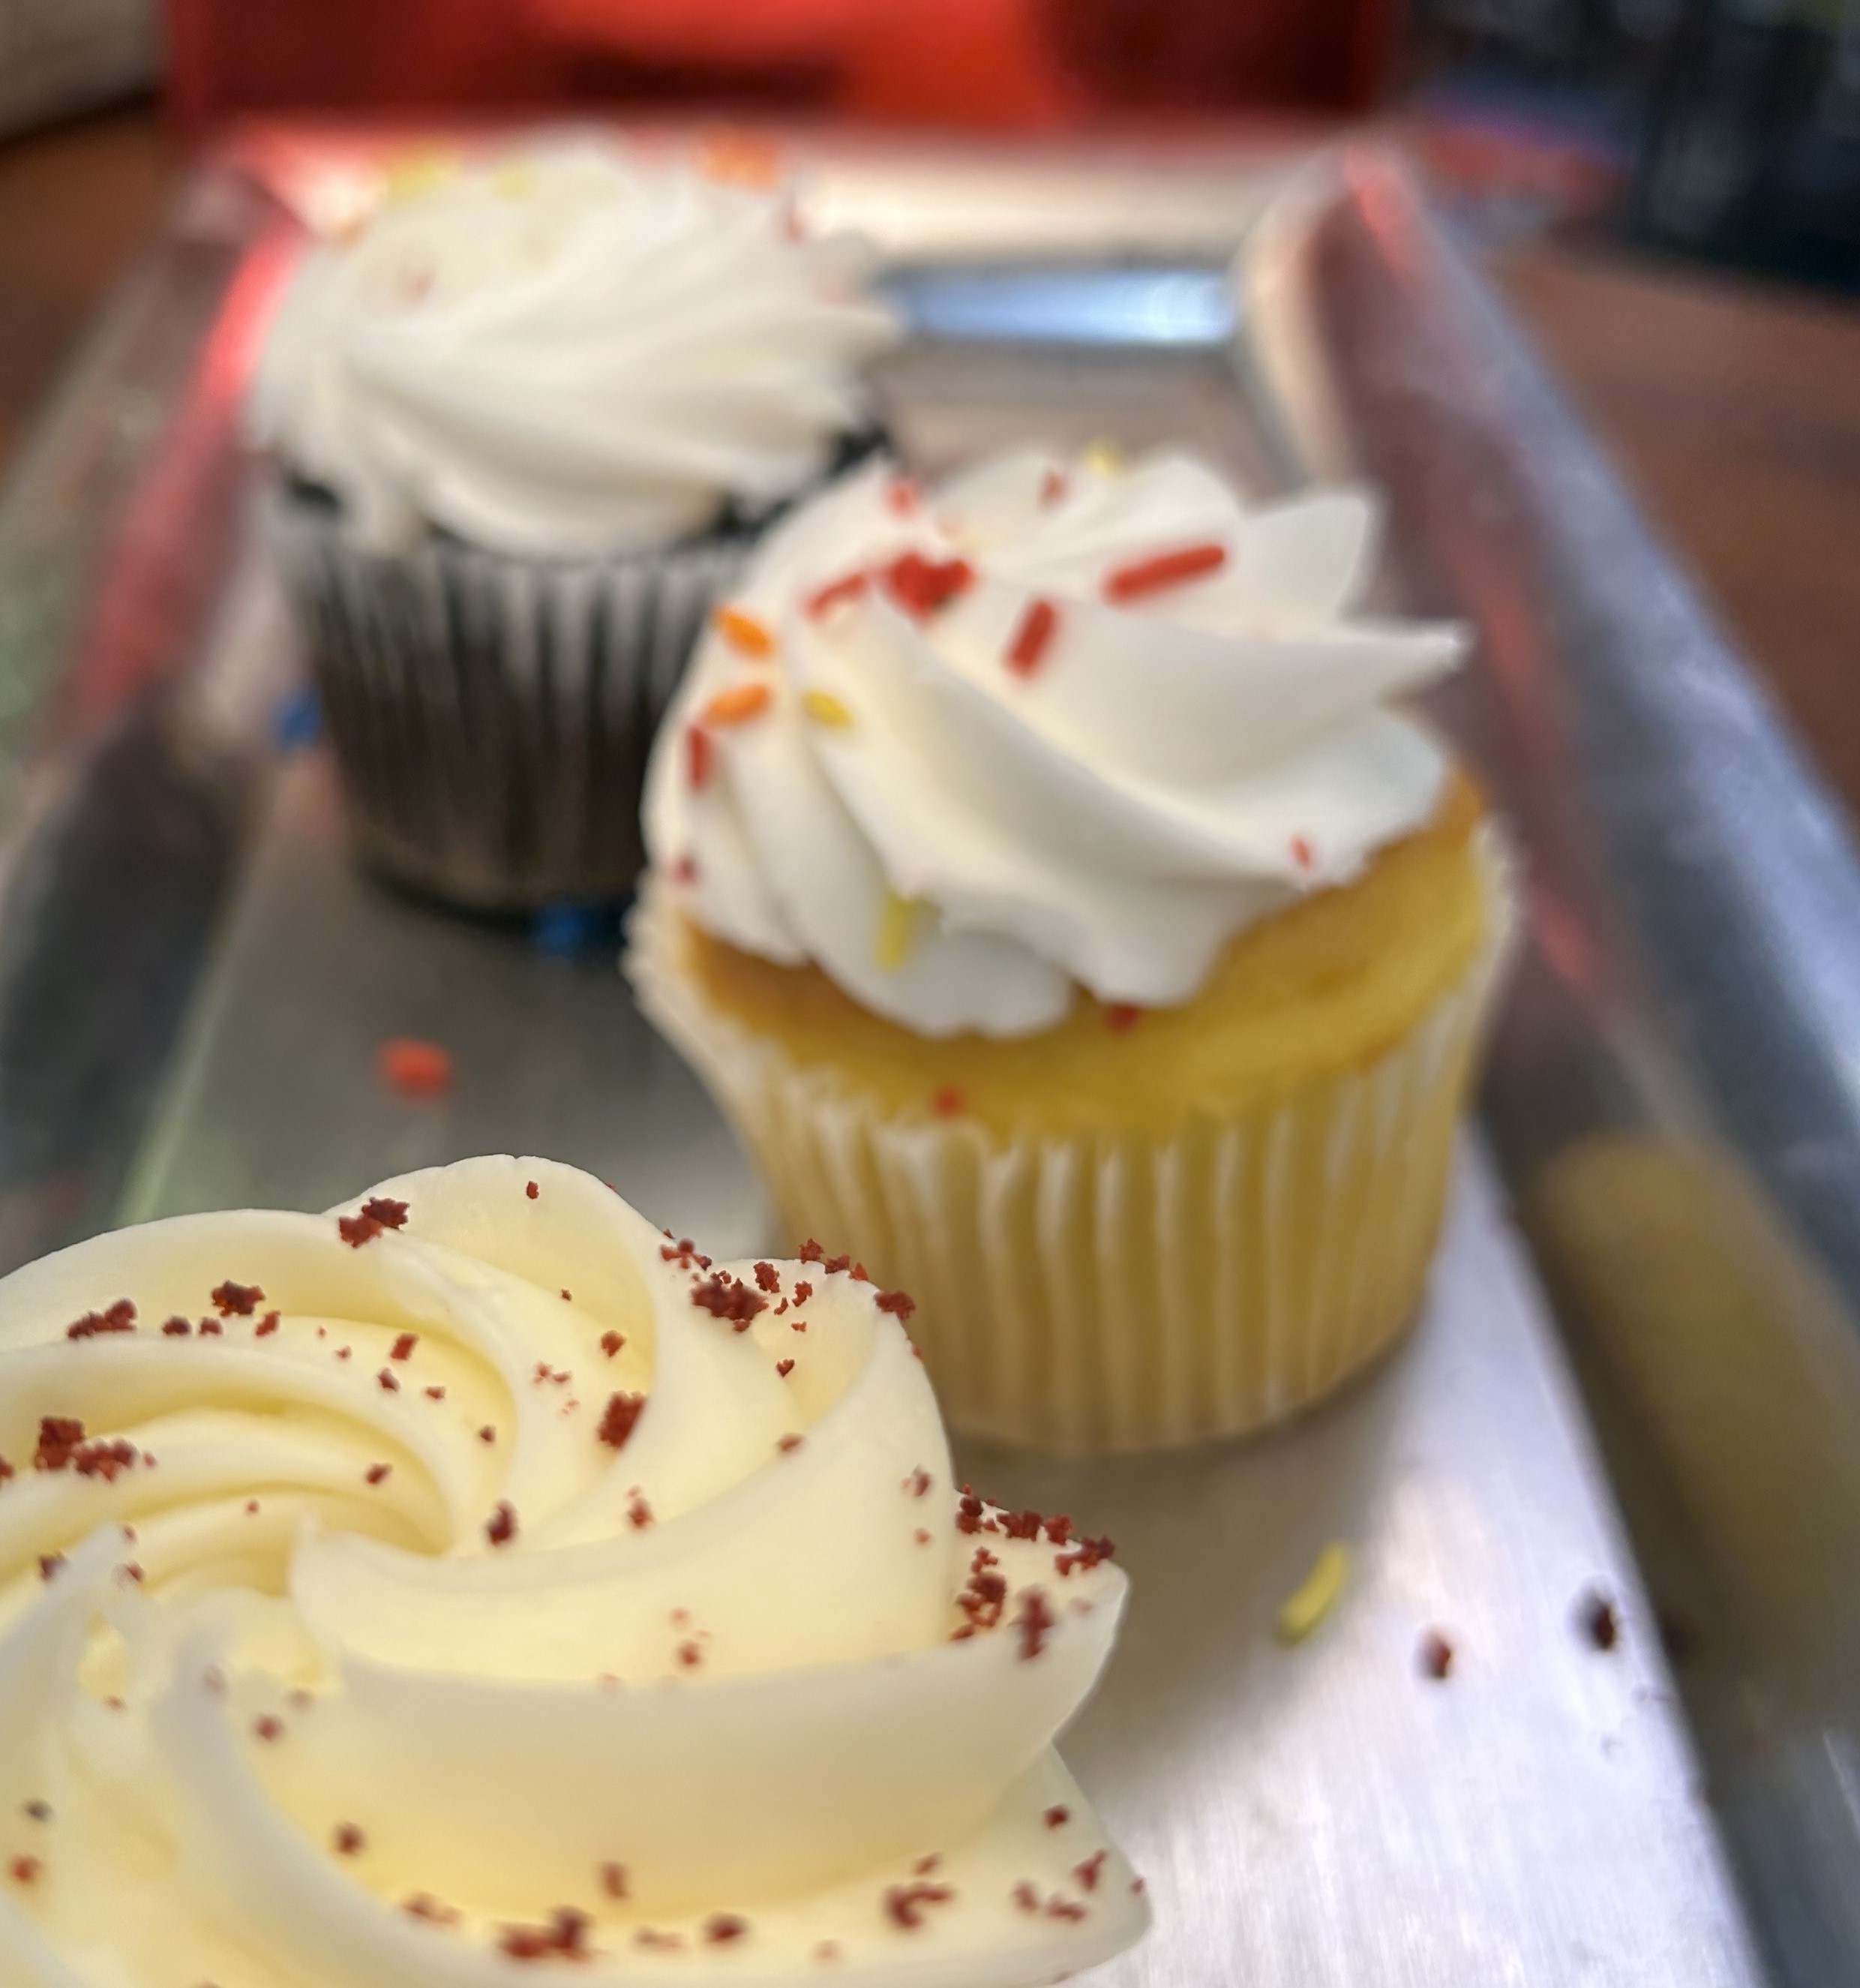 Indulge in Delicious Cupcakes at Our Bakery